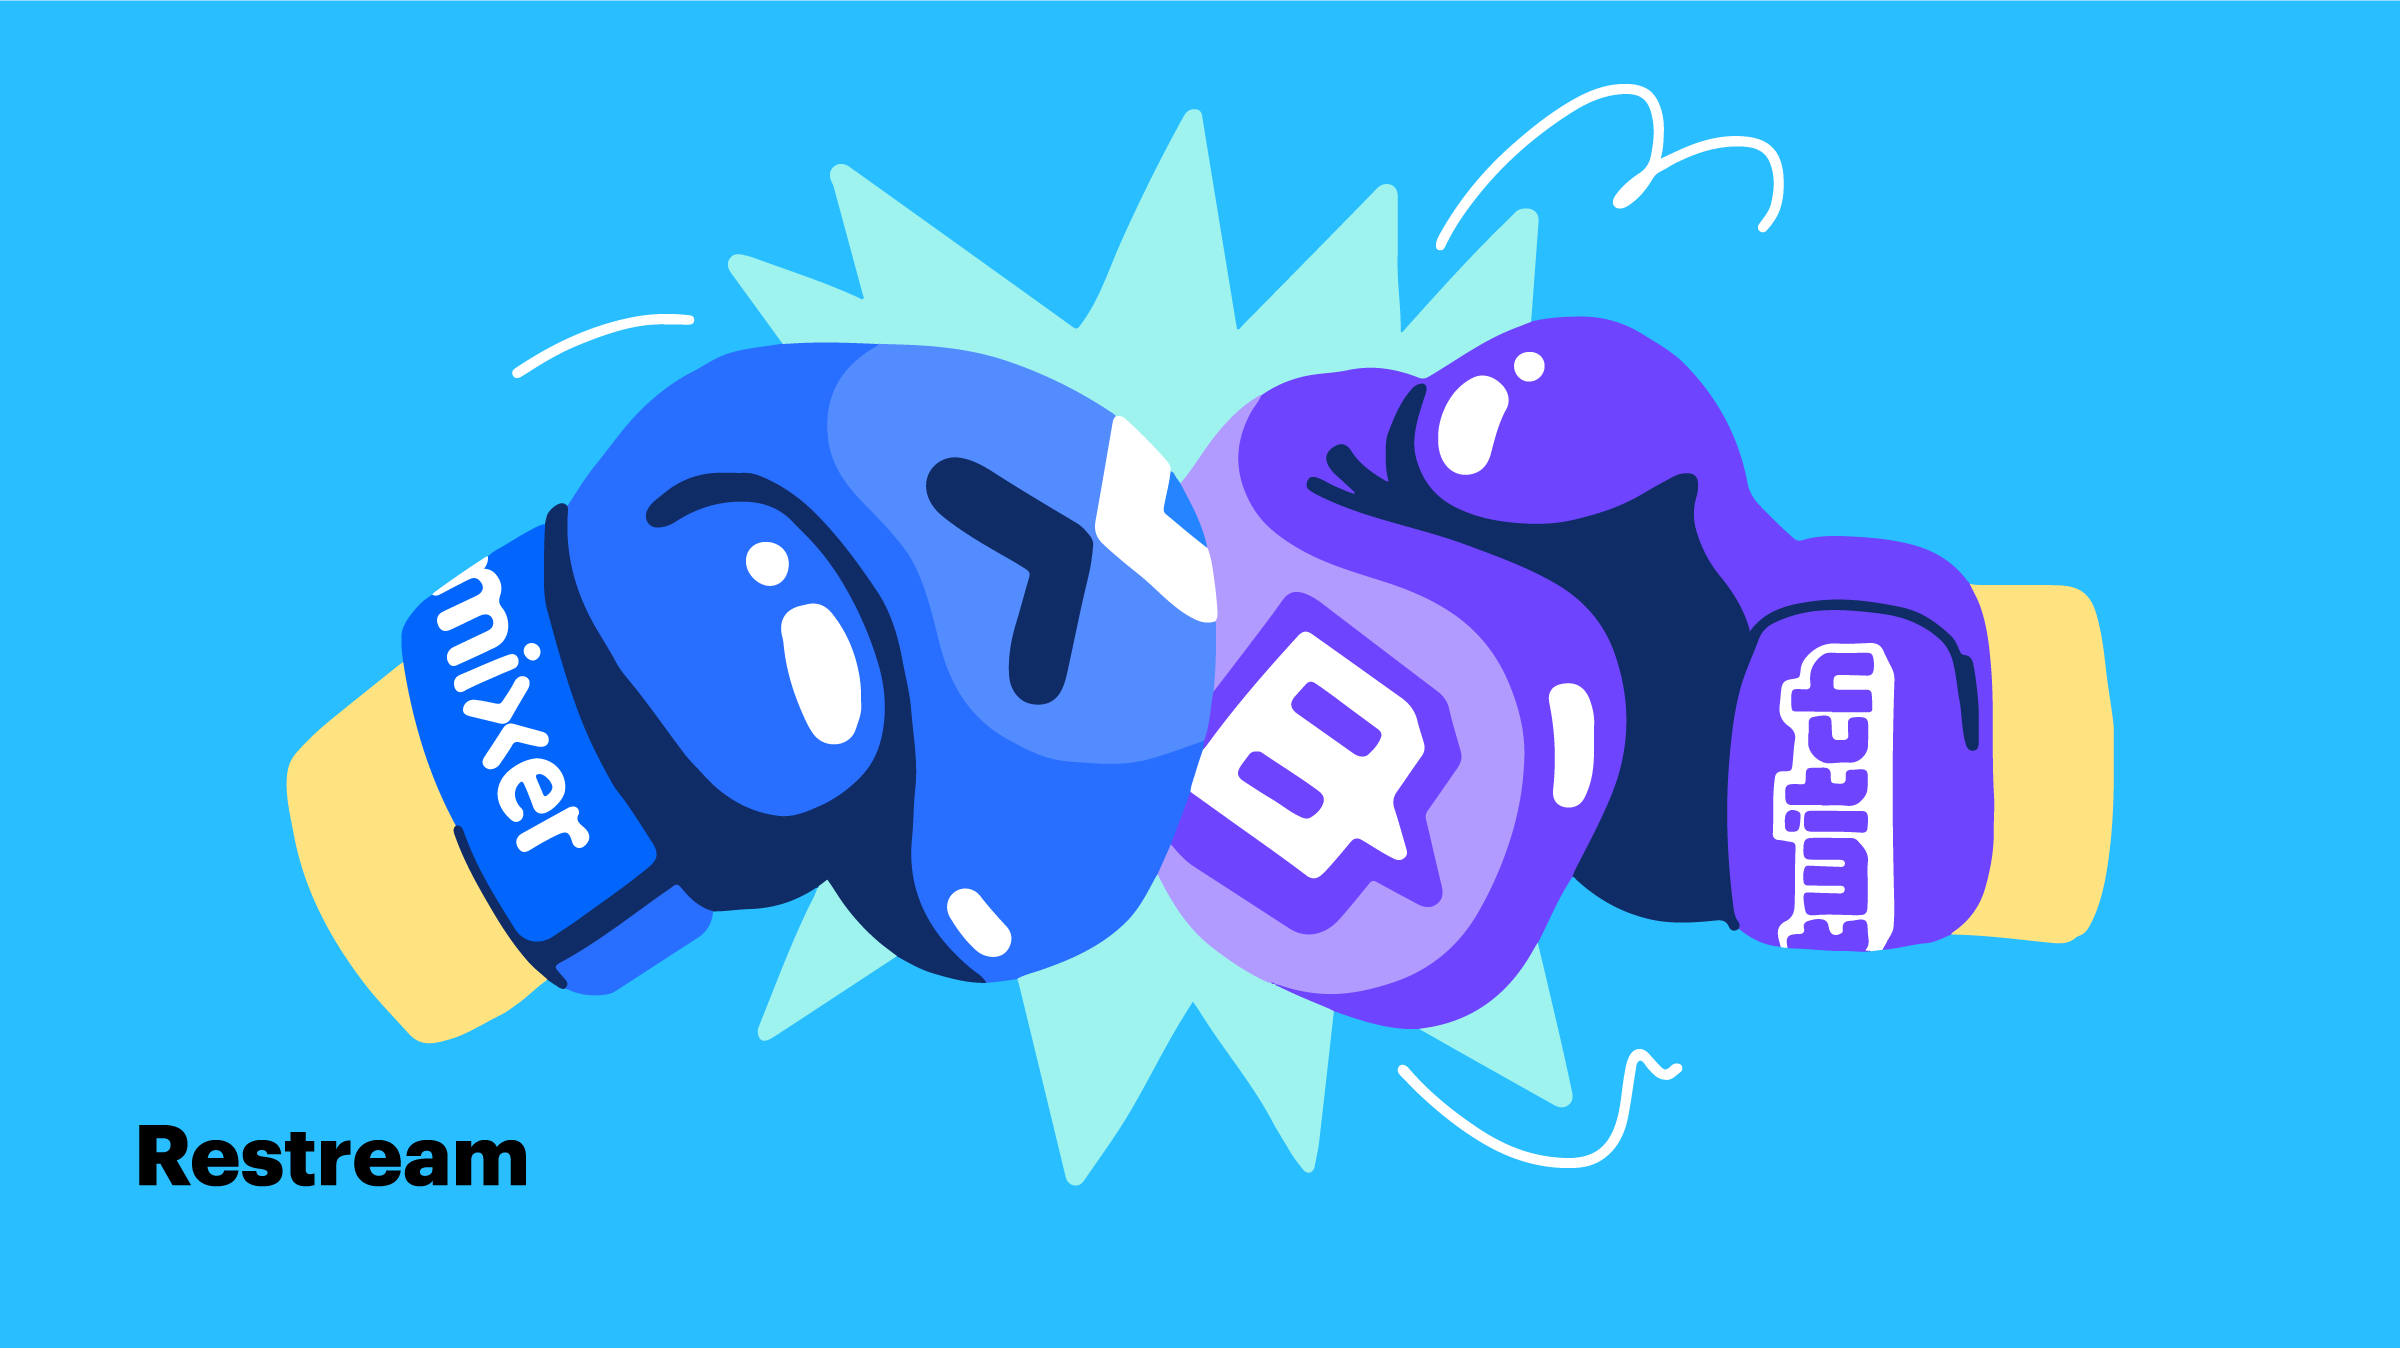 Mixer vs. Twitch: Which Is Better? – Restream Blog